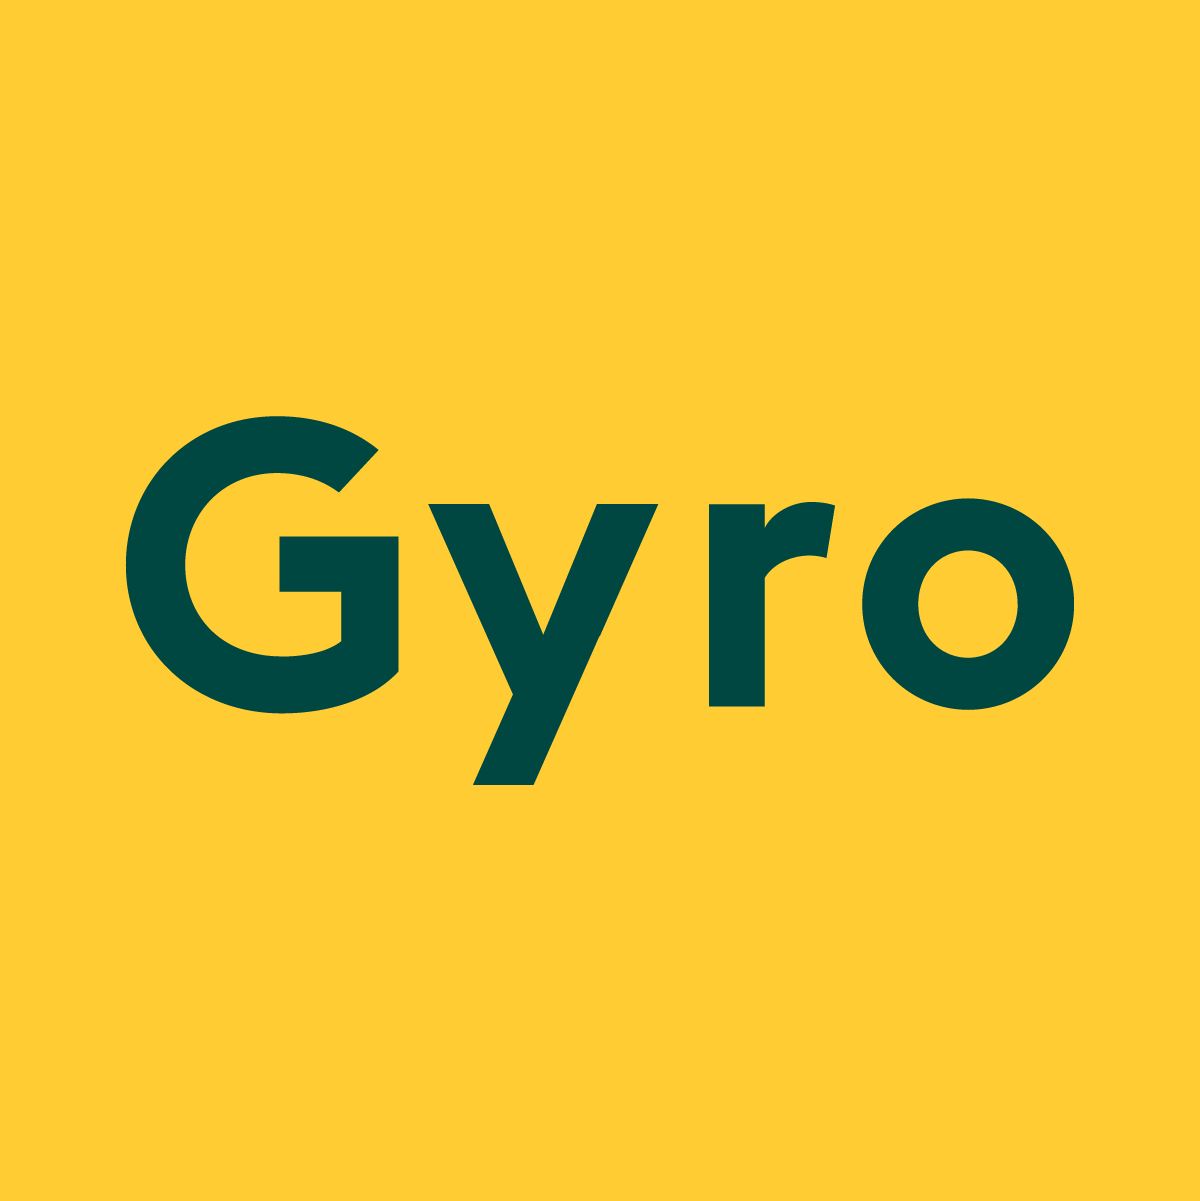 Gyro Logo - We accelerate people, cultures and brands - Gyro